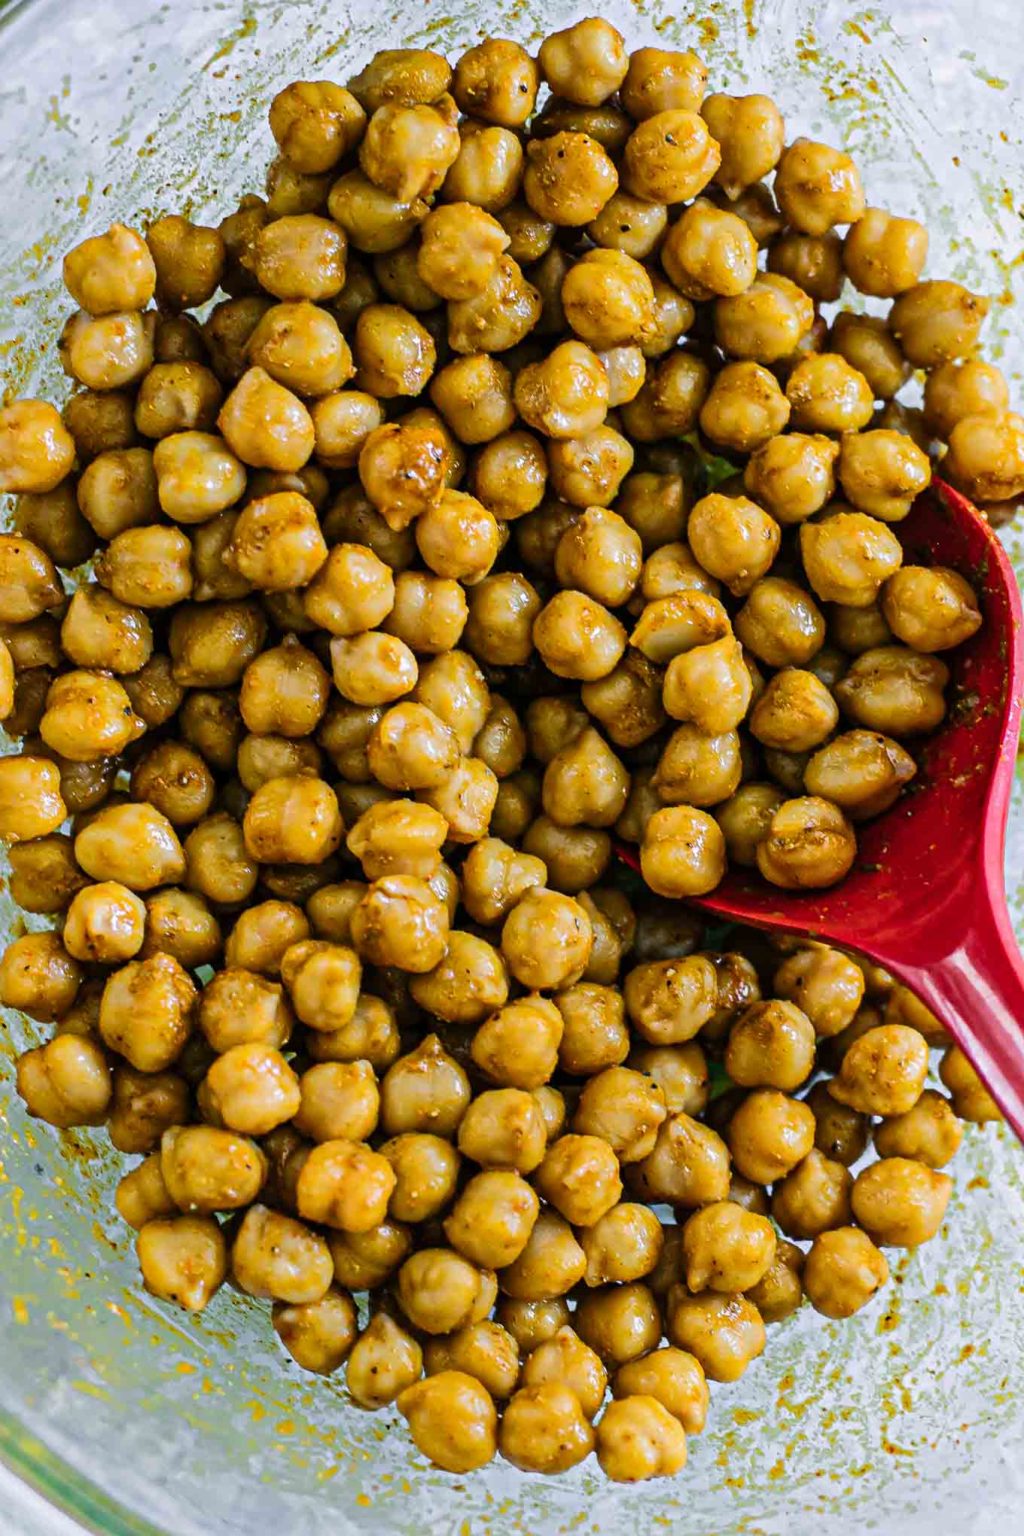 Sweet and Spicy Roasted Chickpeas ⋆ Oil-Free, Vegan, 30 Minutes!